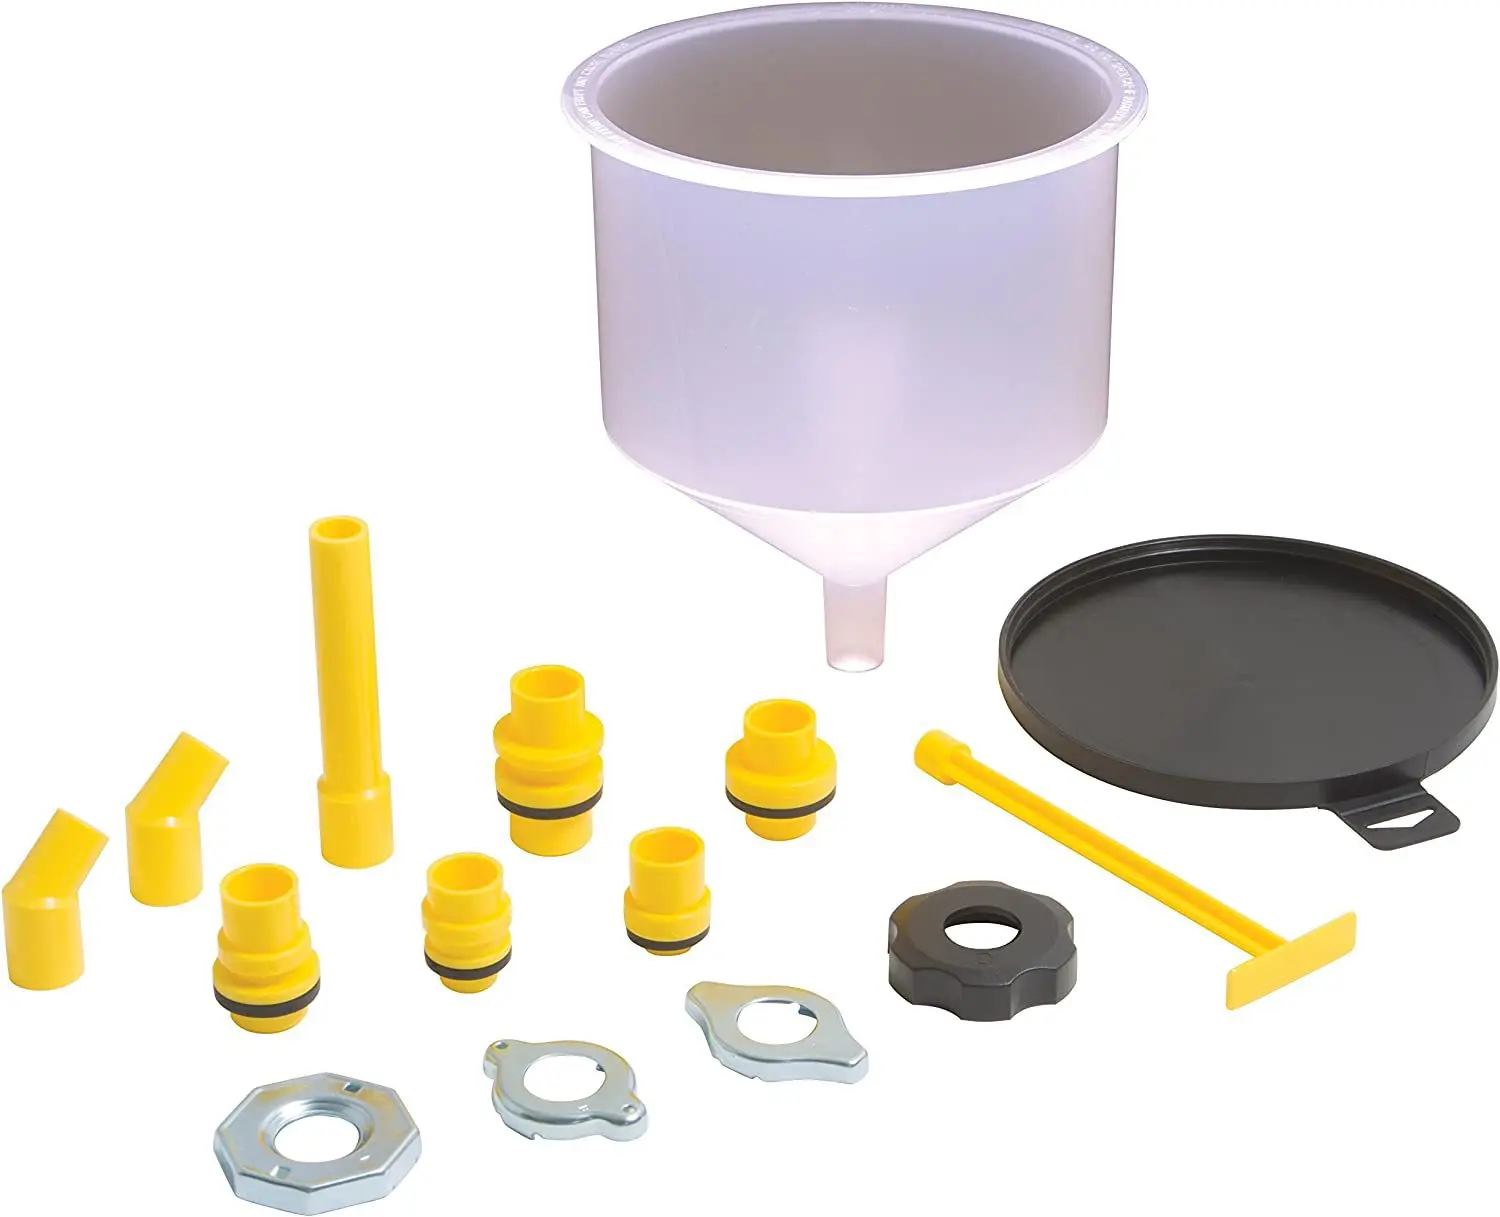 Coolant Funnel Kit with Valve Switch Radiator Antifreeze funnel